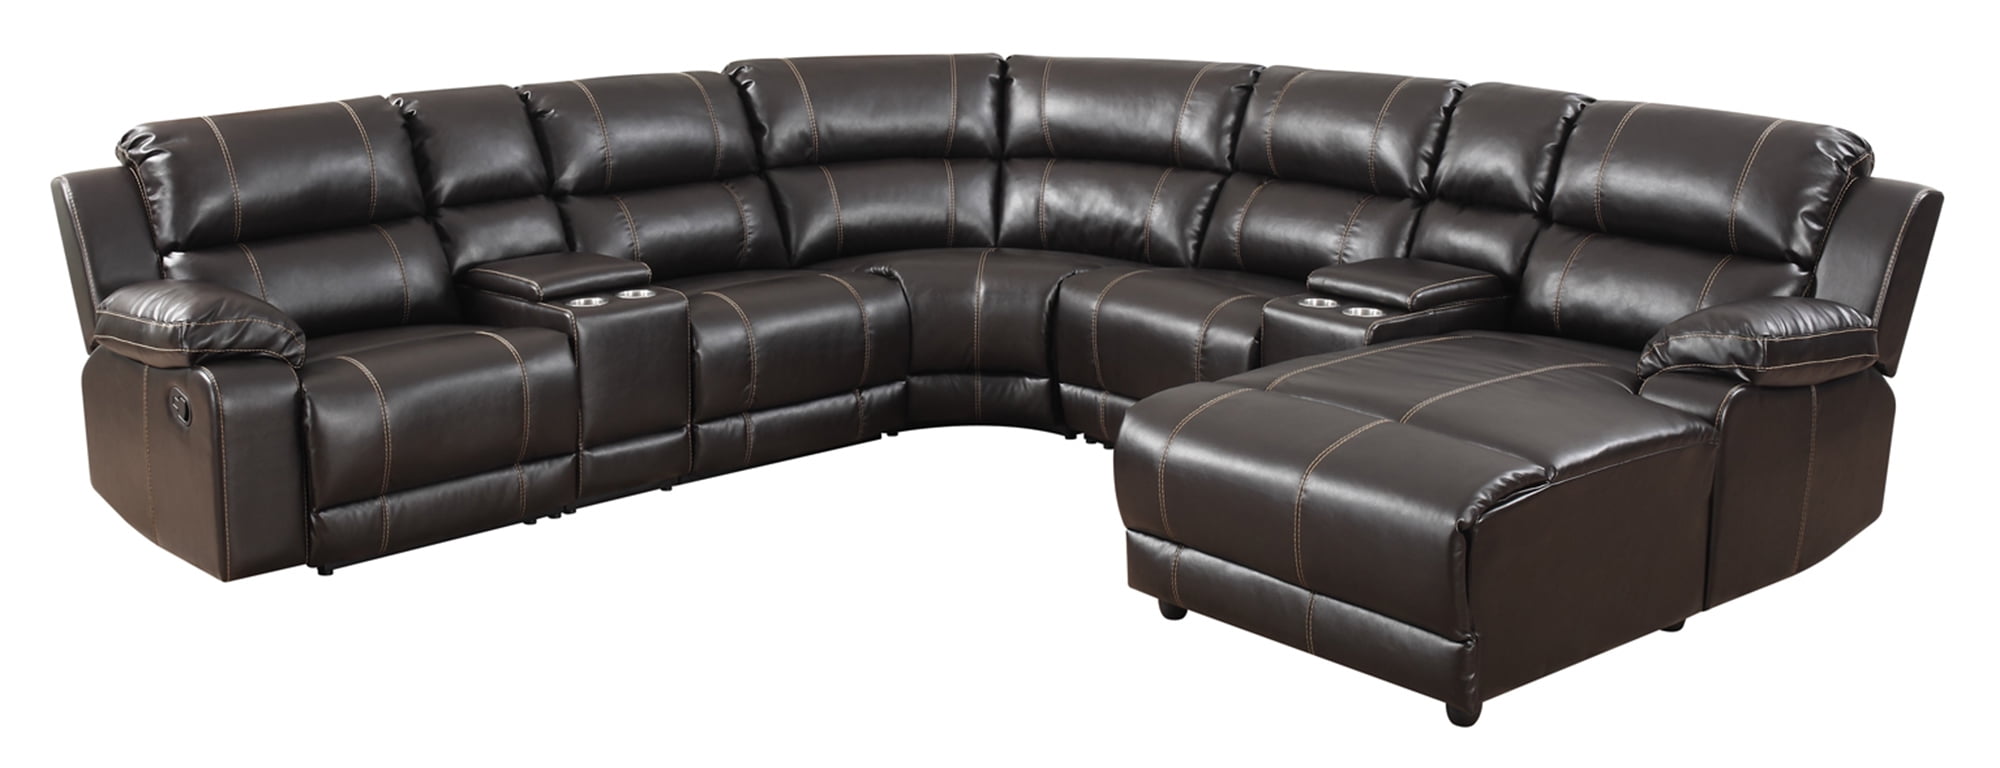 7 piece leather sectional sofa